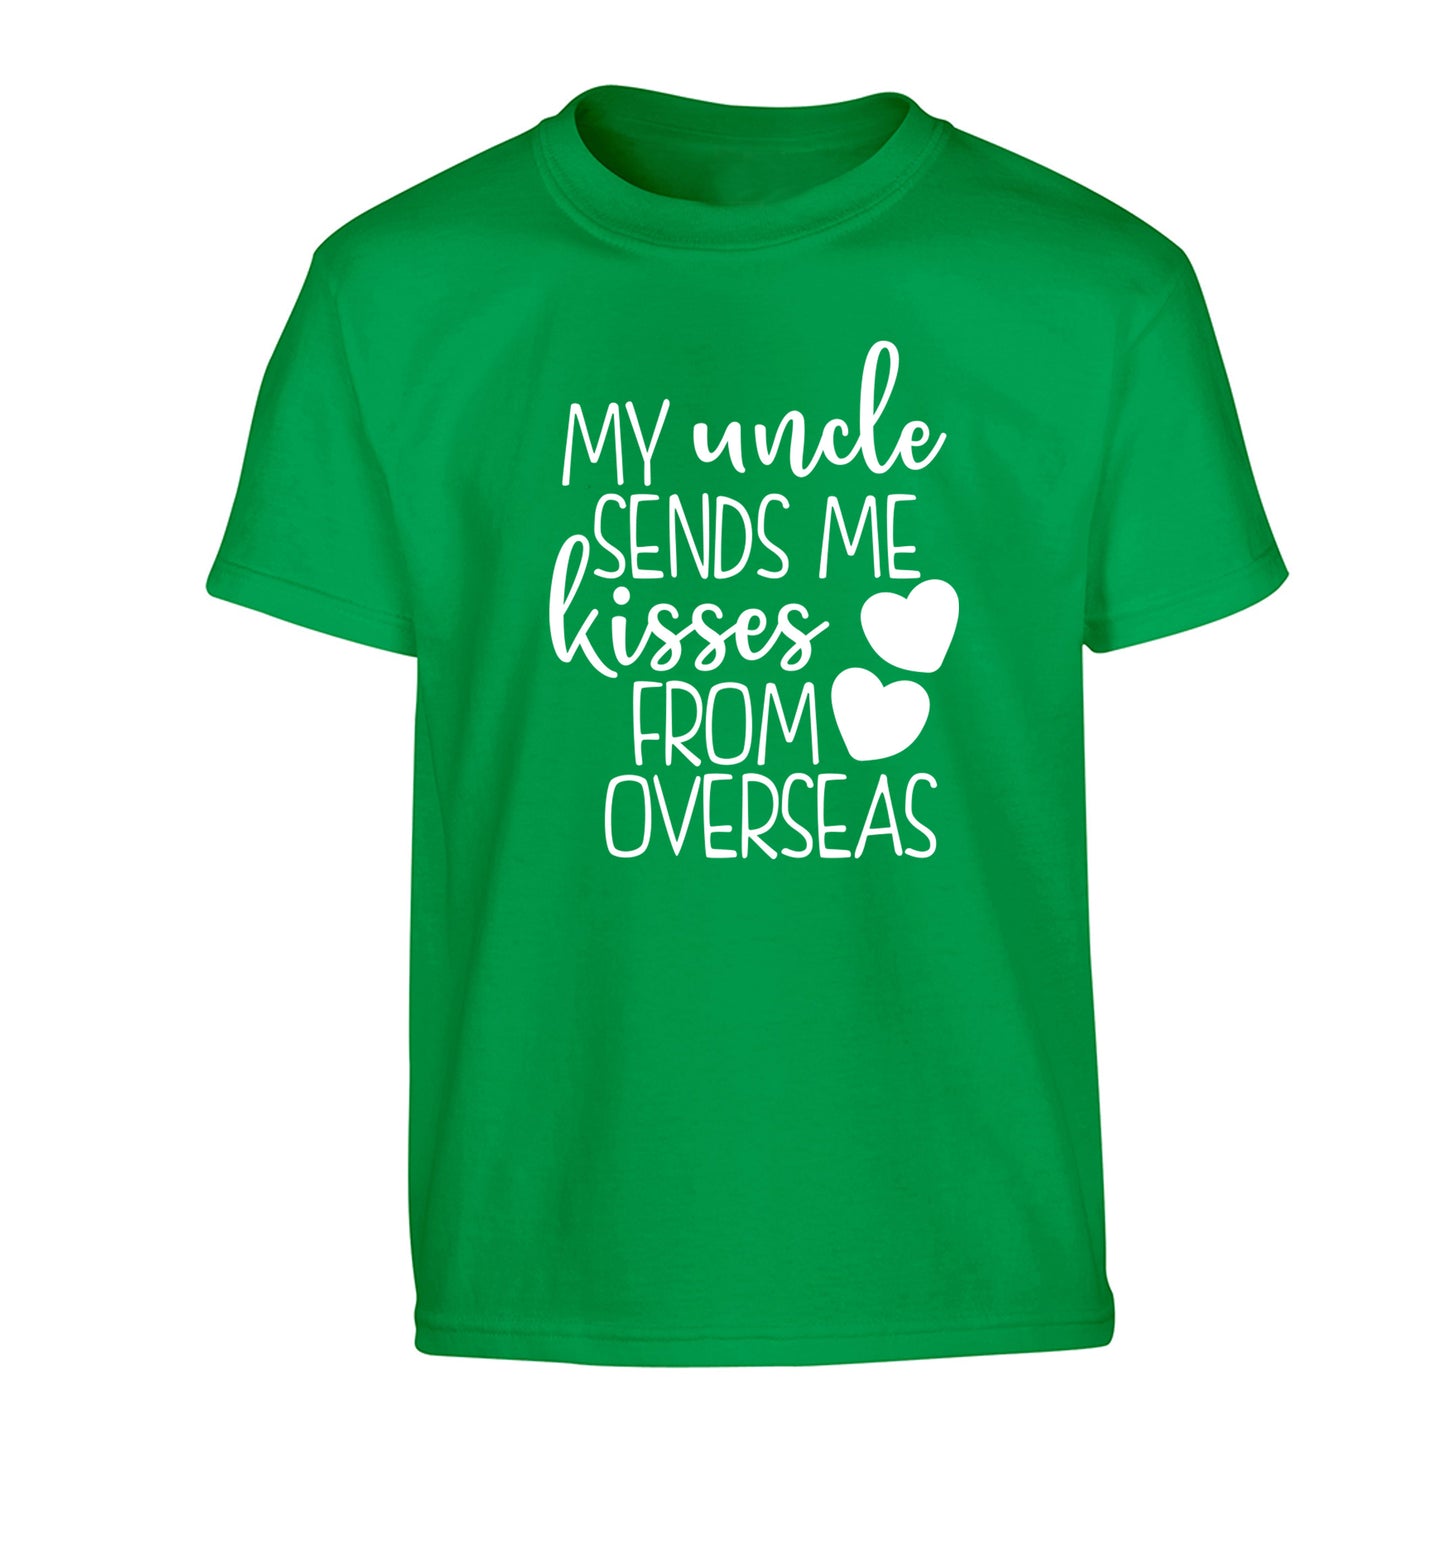 My uncle sends me kisses from overseas Children's green Tshirt 12-13 Years